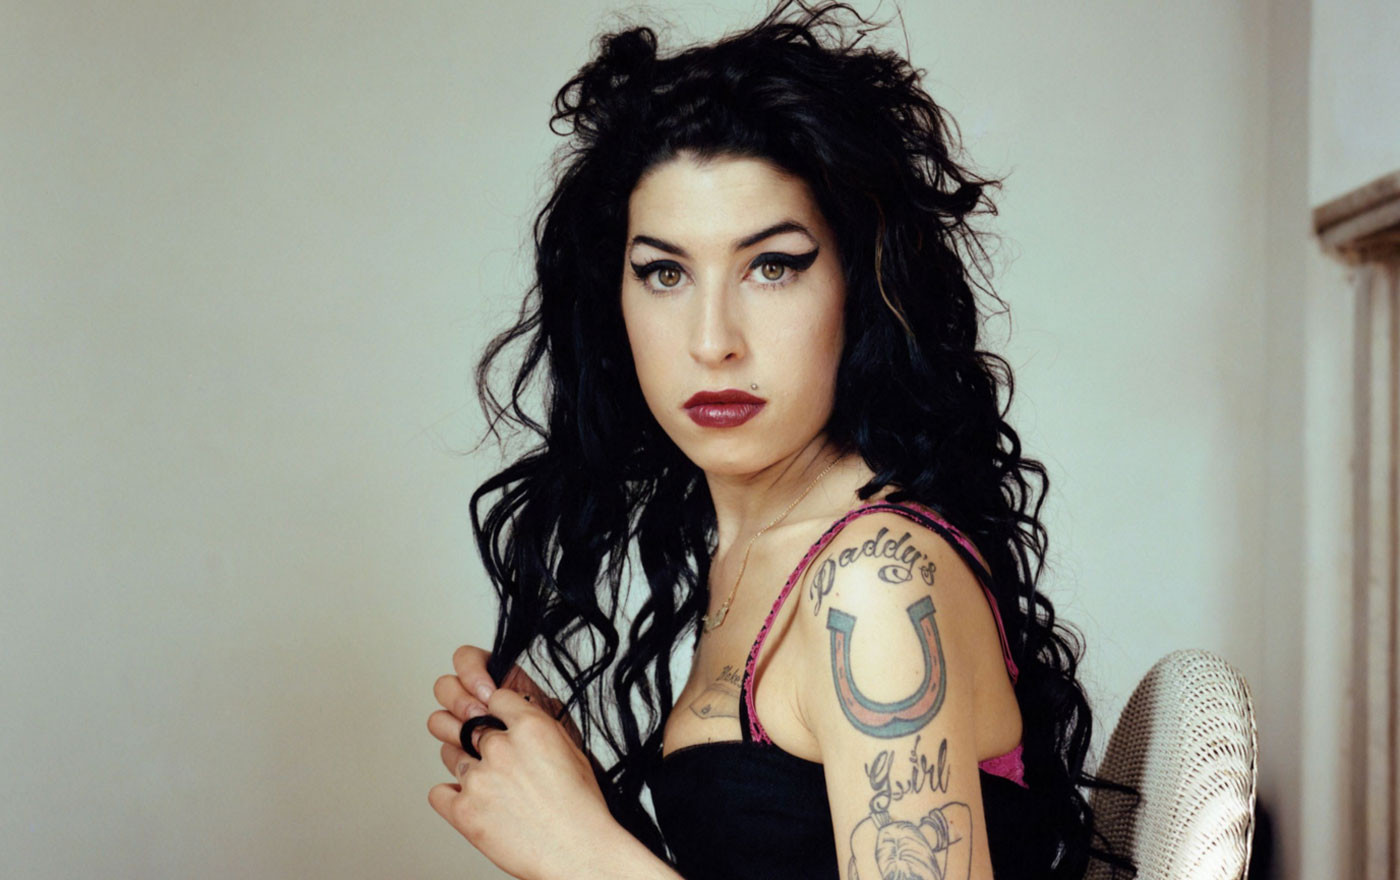 Back to Black, the Amy Winehouse Biopic: Everything We Know